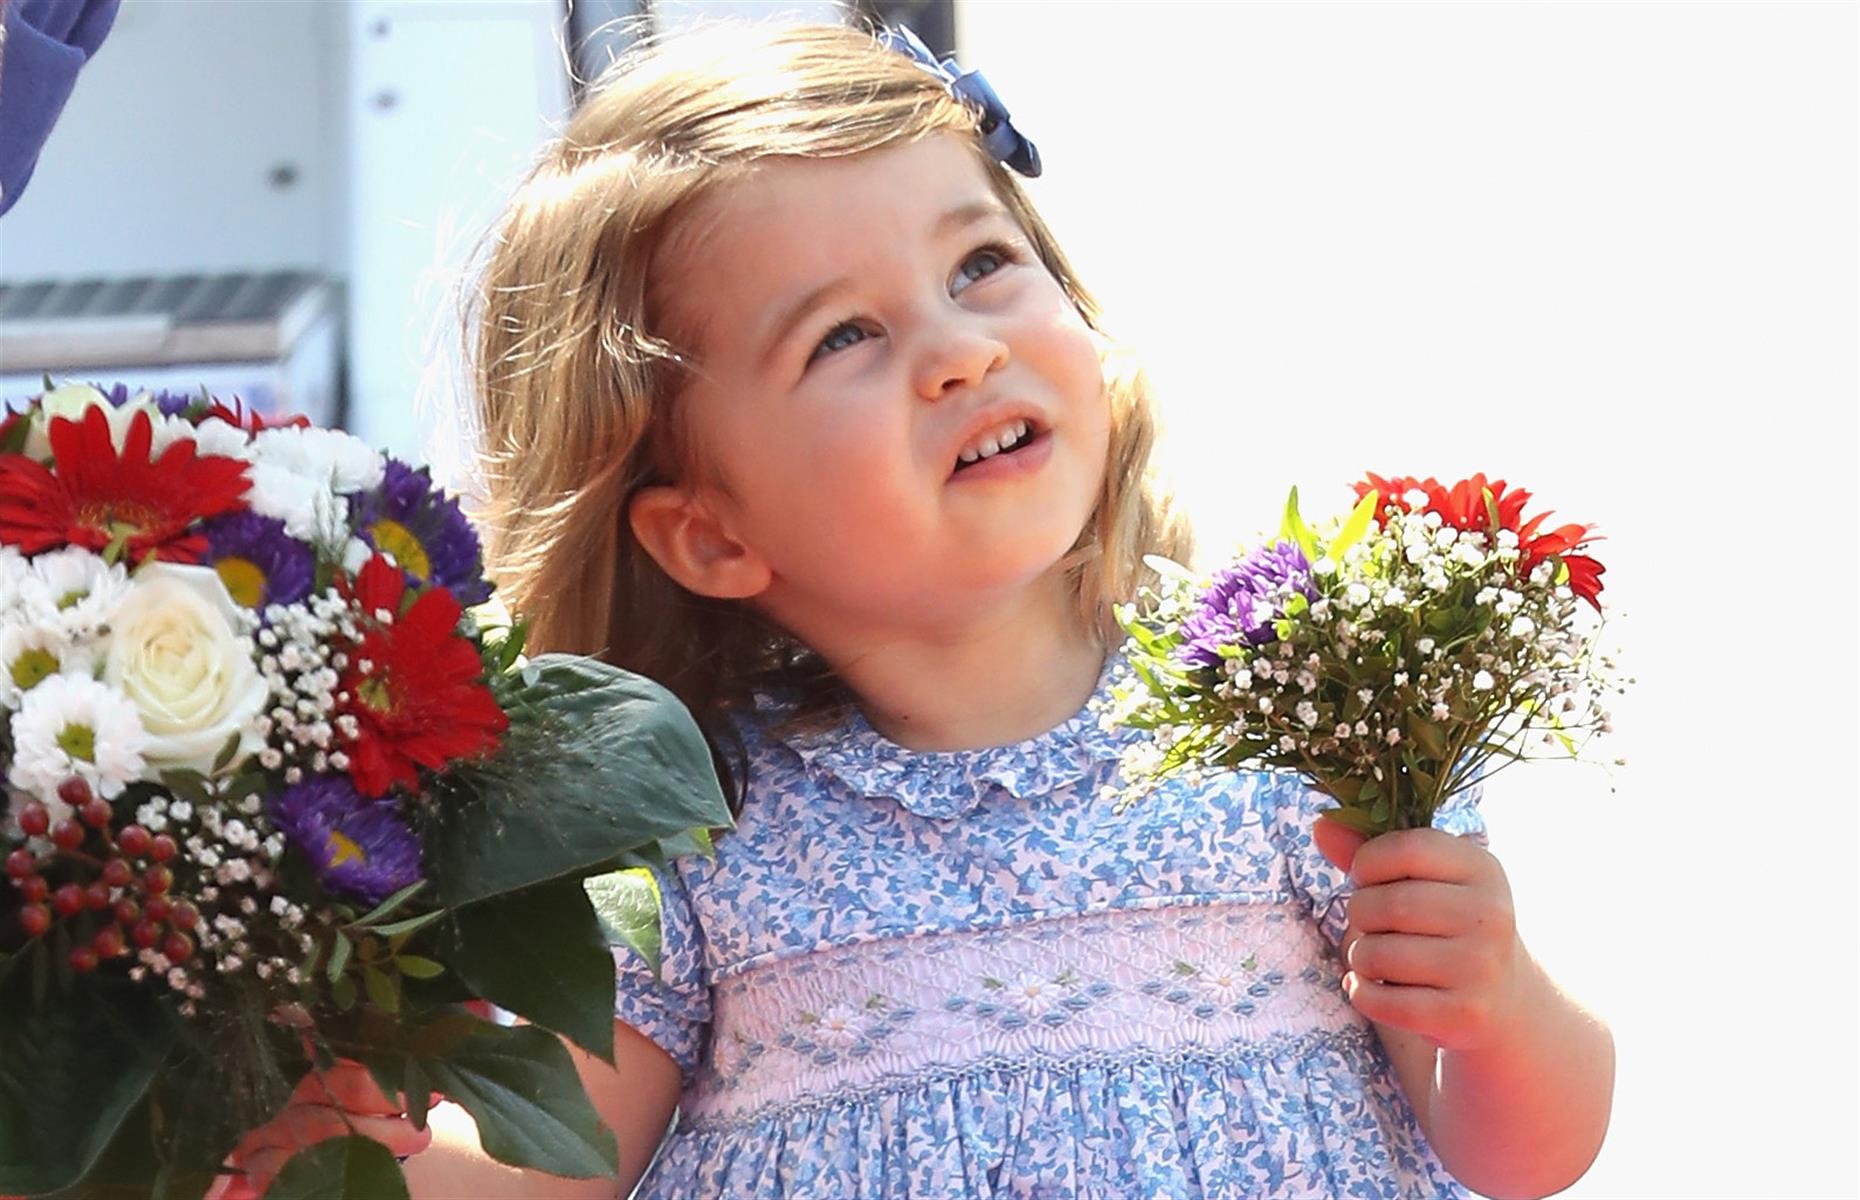 <p>During a visit to an Enfield primary school in north London for Children's Mental Health Week in 2019, Kate Middleton revealed that Princess Charlotte 'loves olives'. According to <em>People</em>, the Duchess of Cambridge said Charlotte and George enjoy cooking with her, with recipes such as made-from-scratch 'cheesy pasta' among favourites.</p>